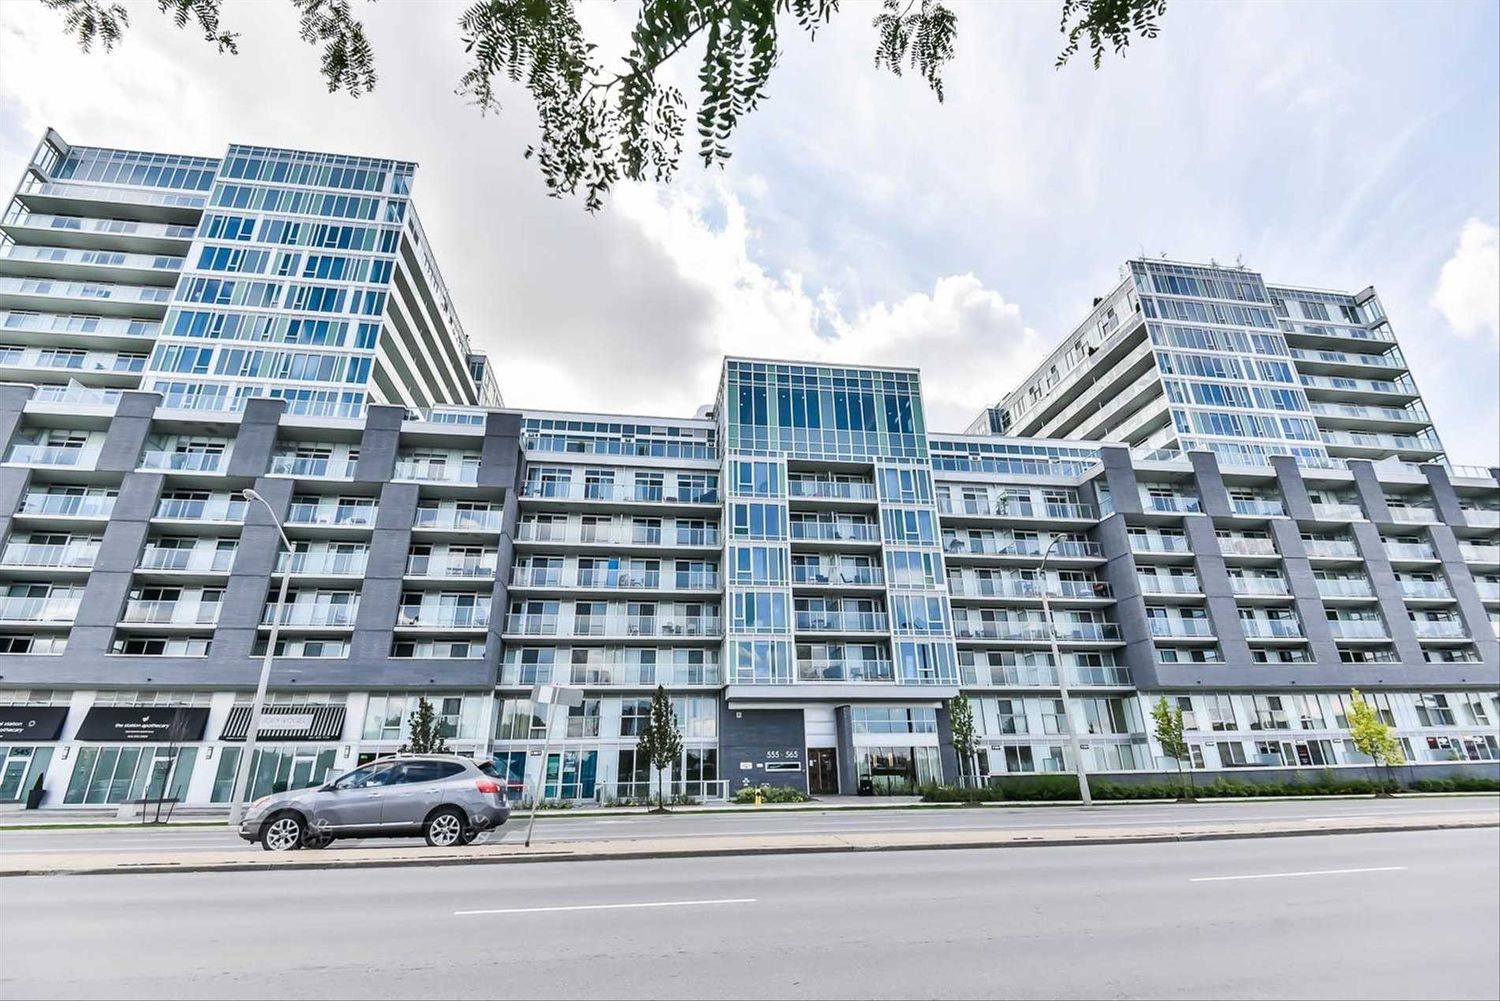 555 Wilson Avenue. The Station Condos is located in  North York, Toronto - image #2 of 2